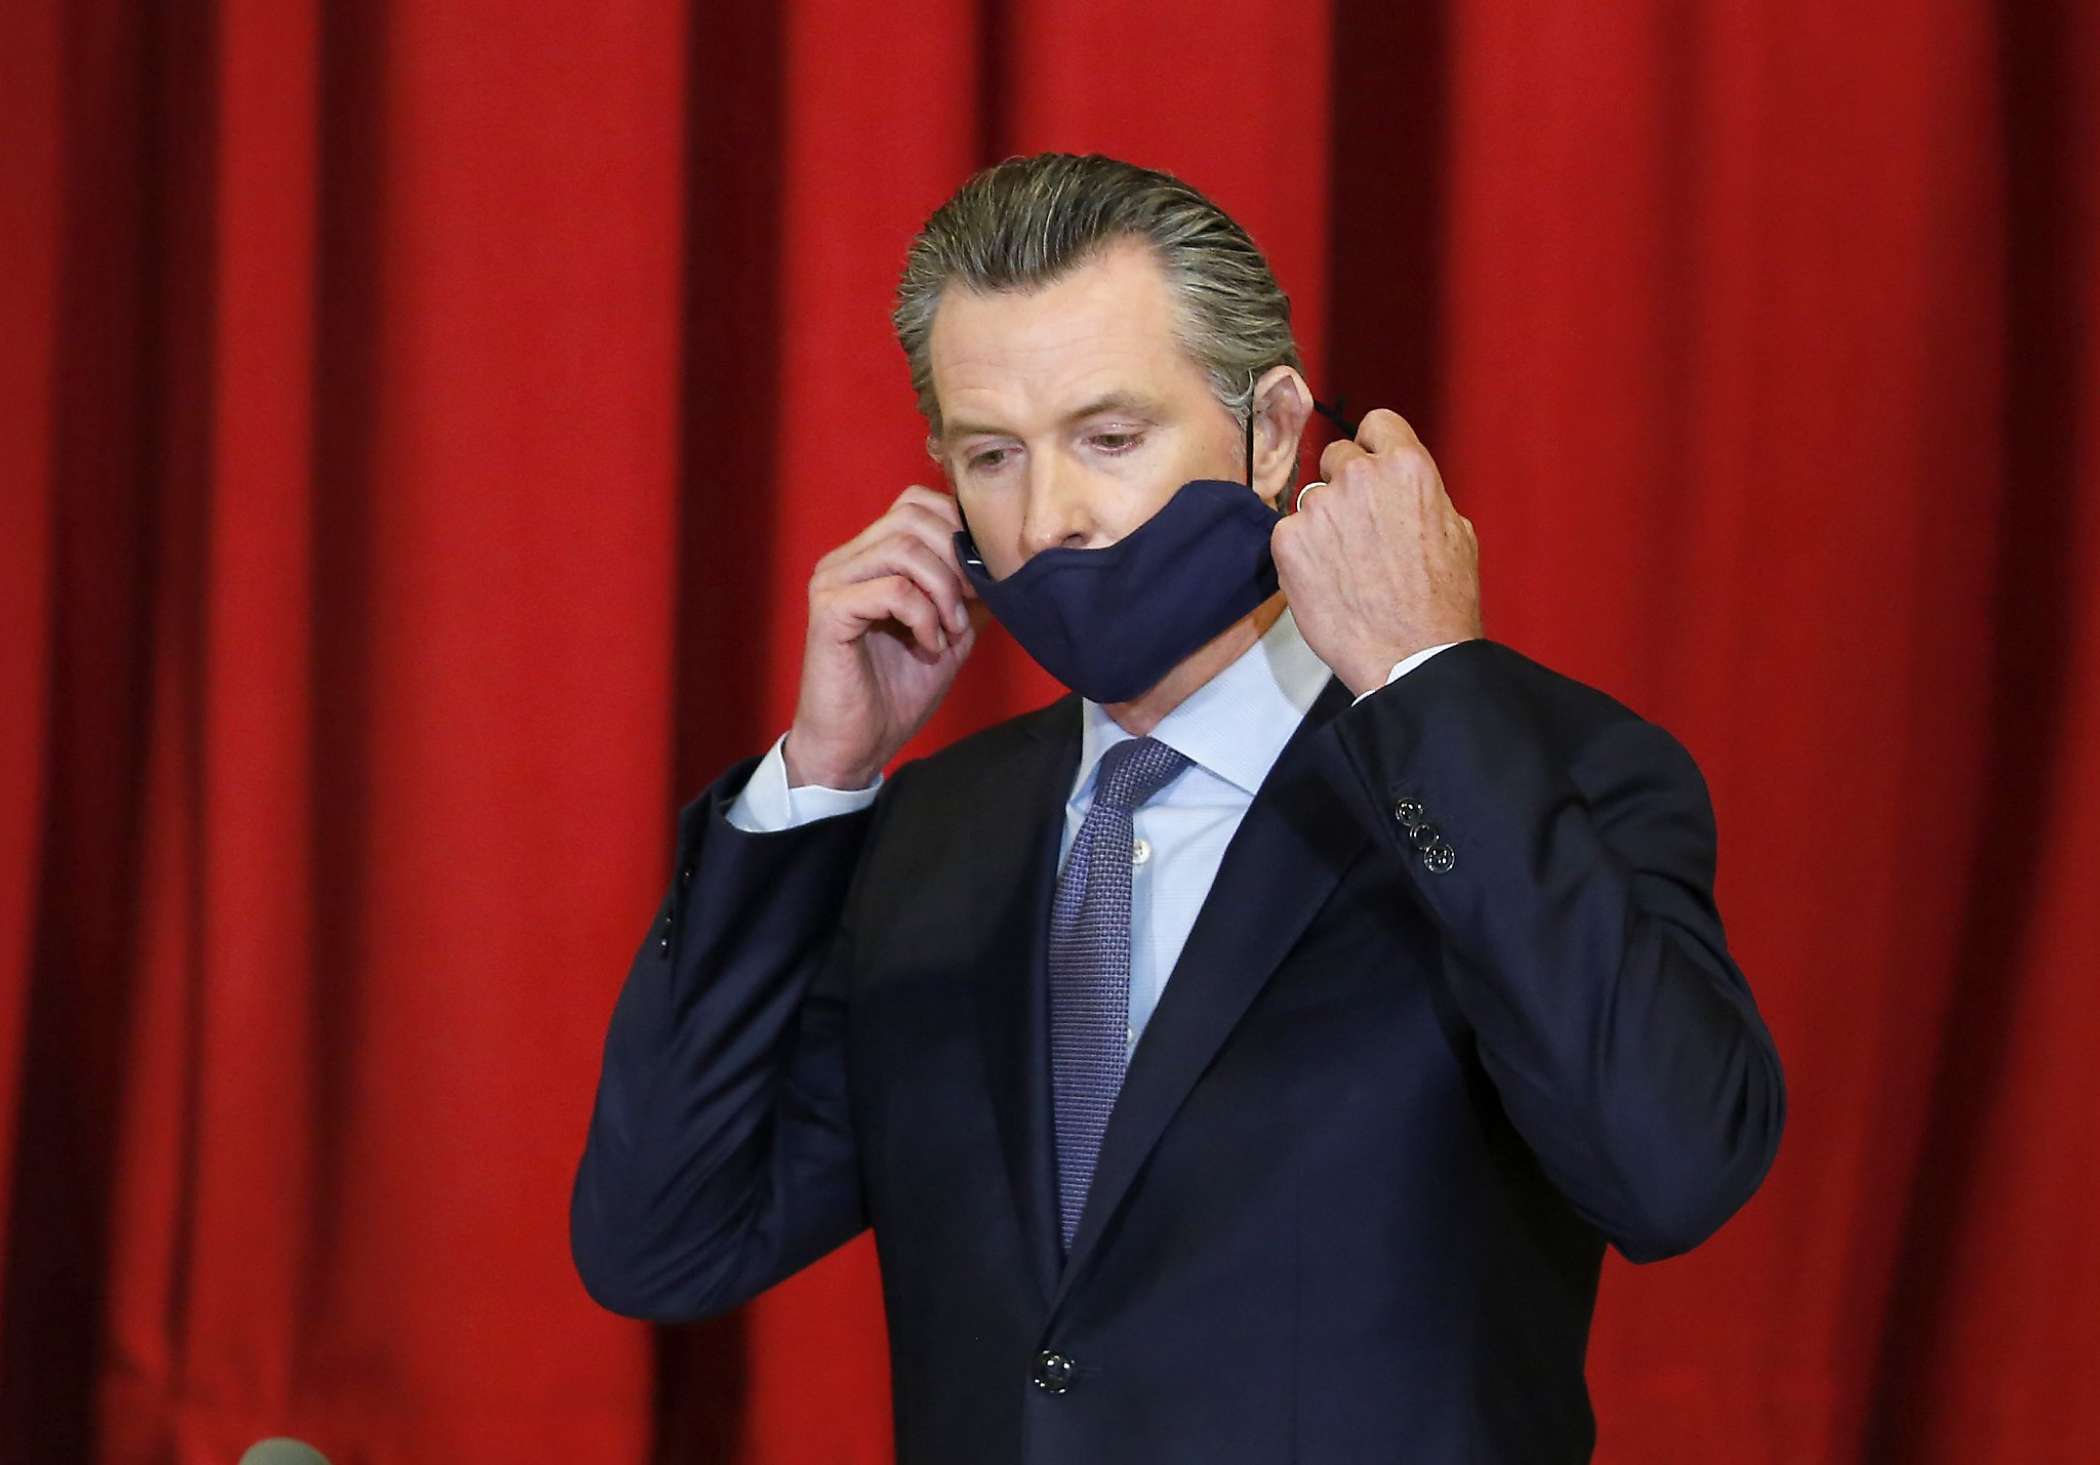 Gavin Newsom could be ‘undermined’ by Democrats in recall efforts, report says